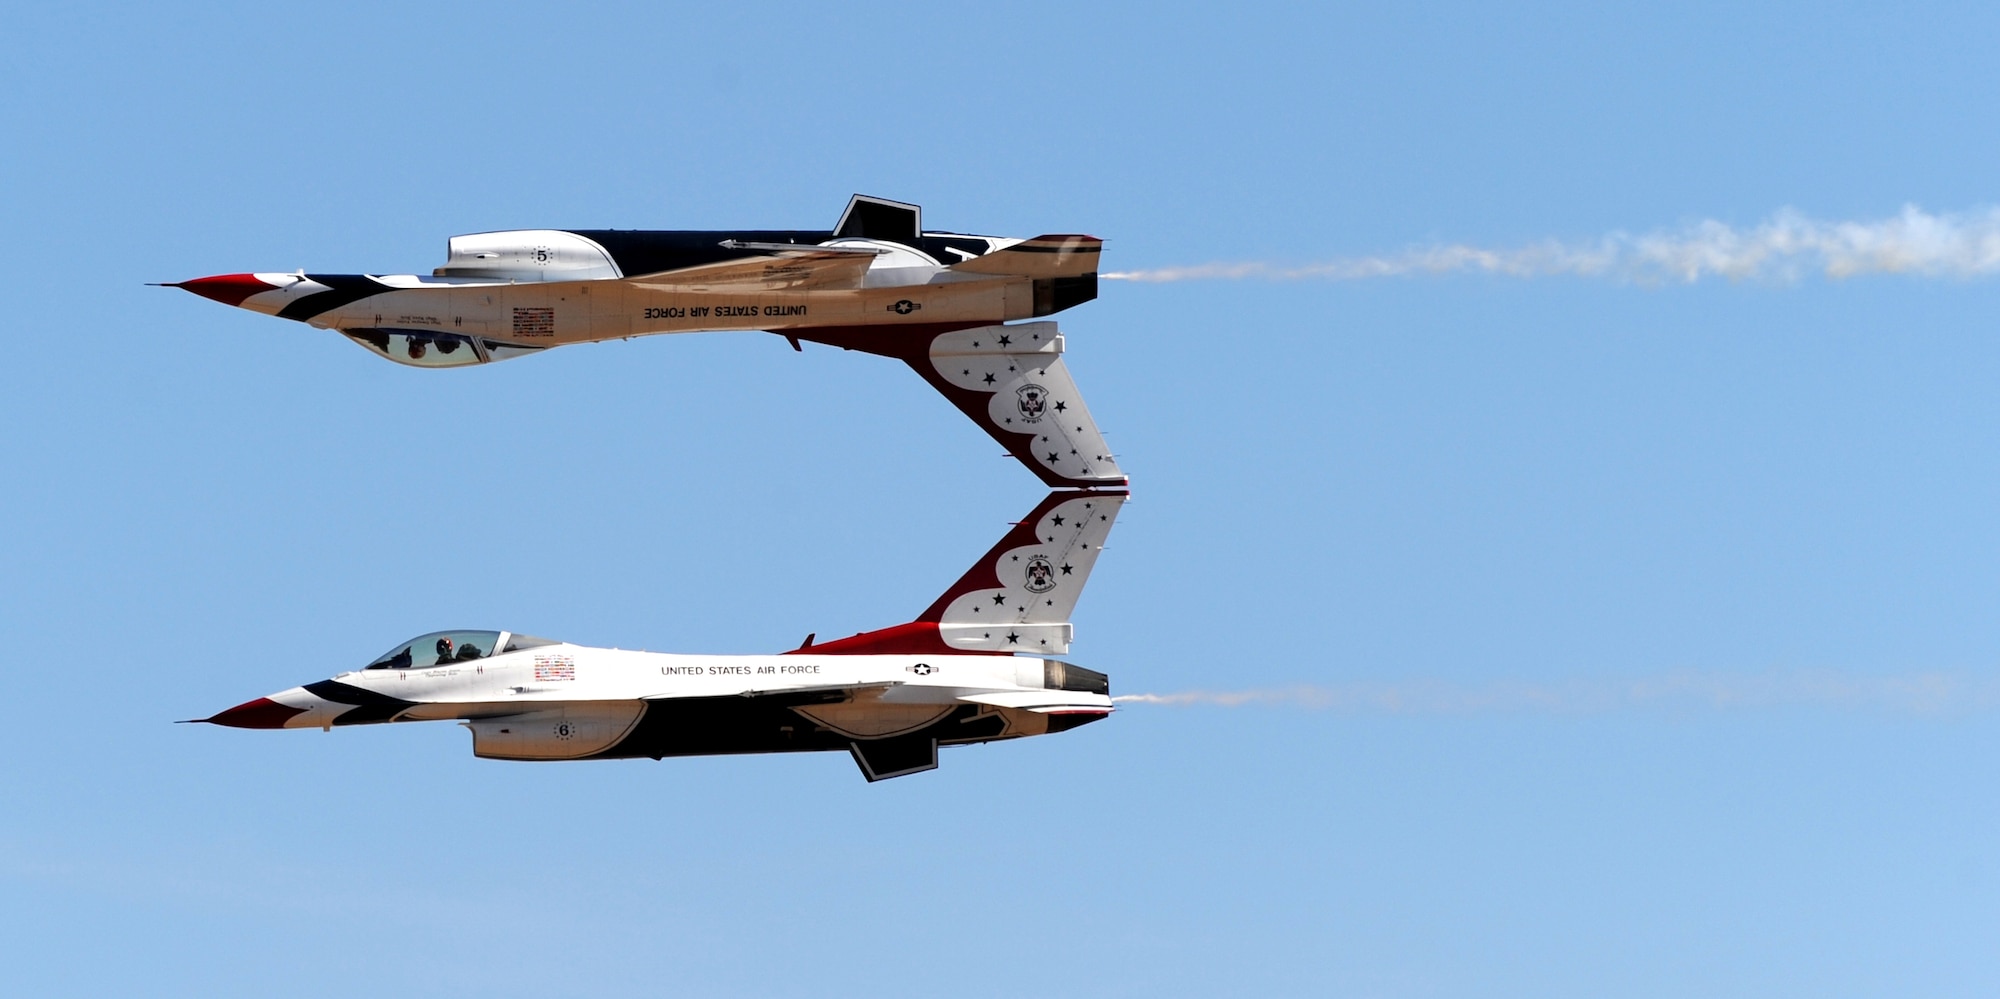 The U.S. Air Force Thunderbirds demonstration team performs an inverted maneuver during the Capital City Air Show at Mather Airport, Sacramento, Calif., Sept. 8, 2012. More than 100,000 people attend this annual event. (U.S. Air Force photo by Staff Sgt. Robert M. Trujillo)